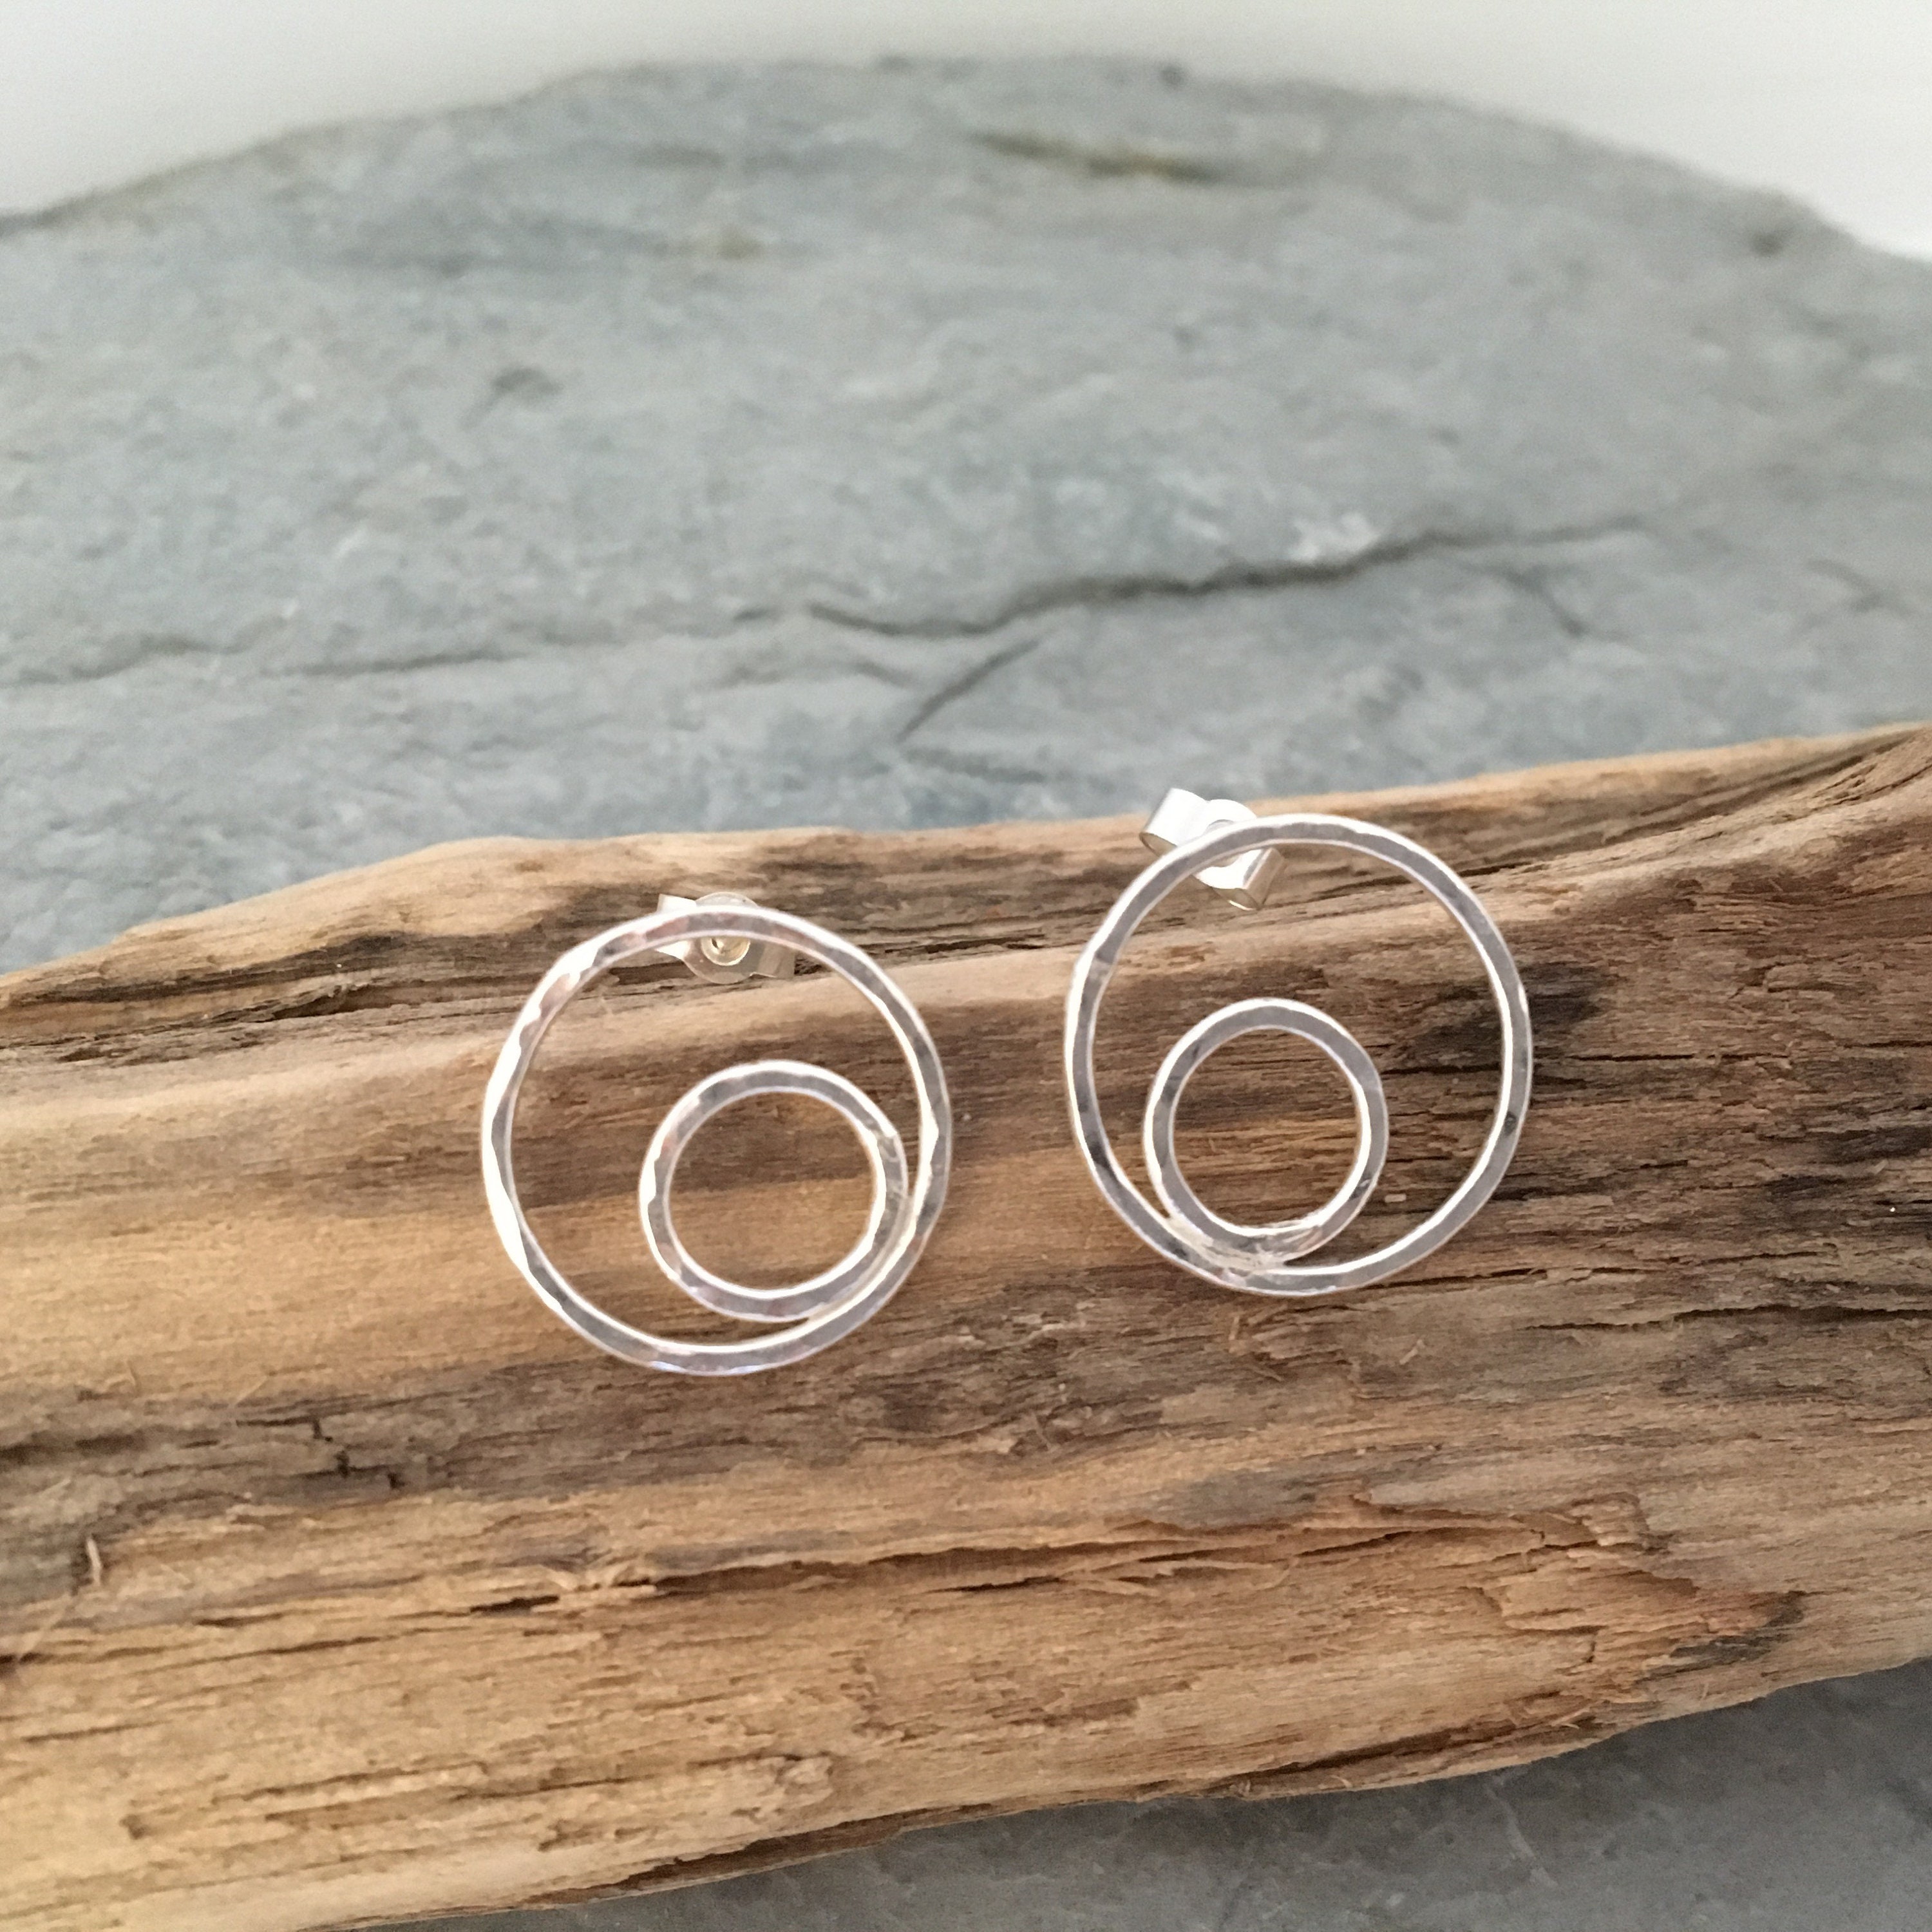 Silver Circle Stud Earrings, Round Small Silver Studs